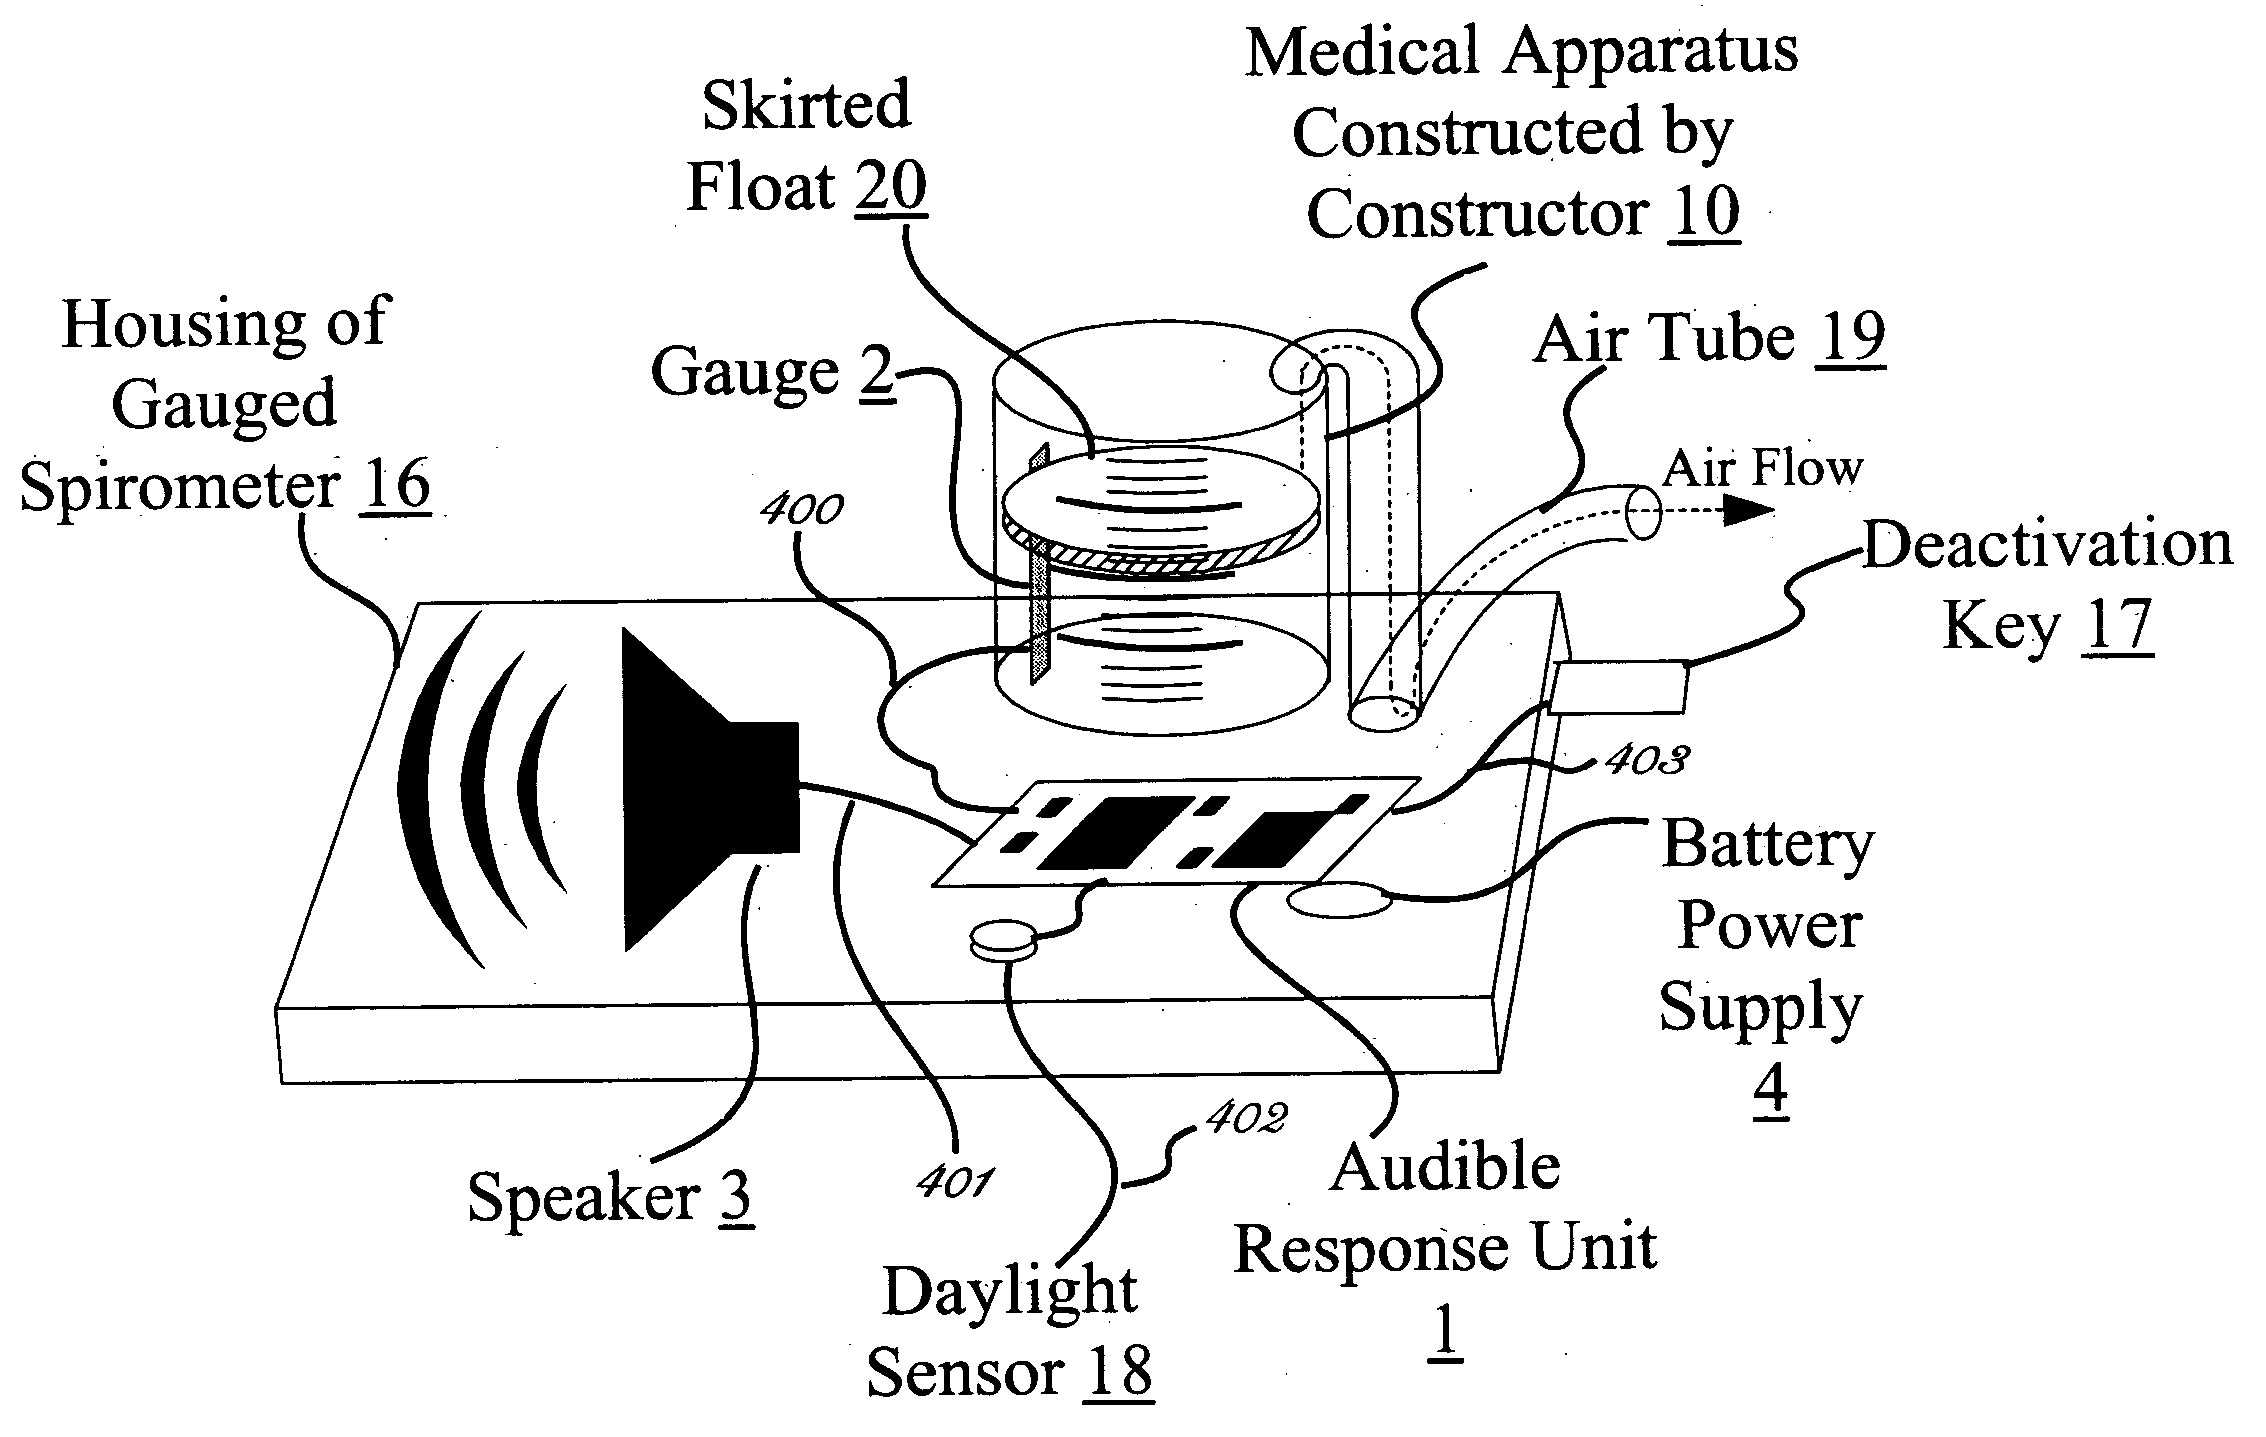 Method of improving medical apparatus in order to reduce or replace ancillary medical assistance by employing audible verbal human sounding voices which provide therapeutic instructions and encourage usage and give measurements as needed emanating from the apparatus's by using electronic technology